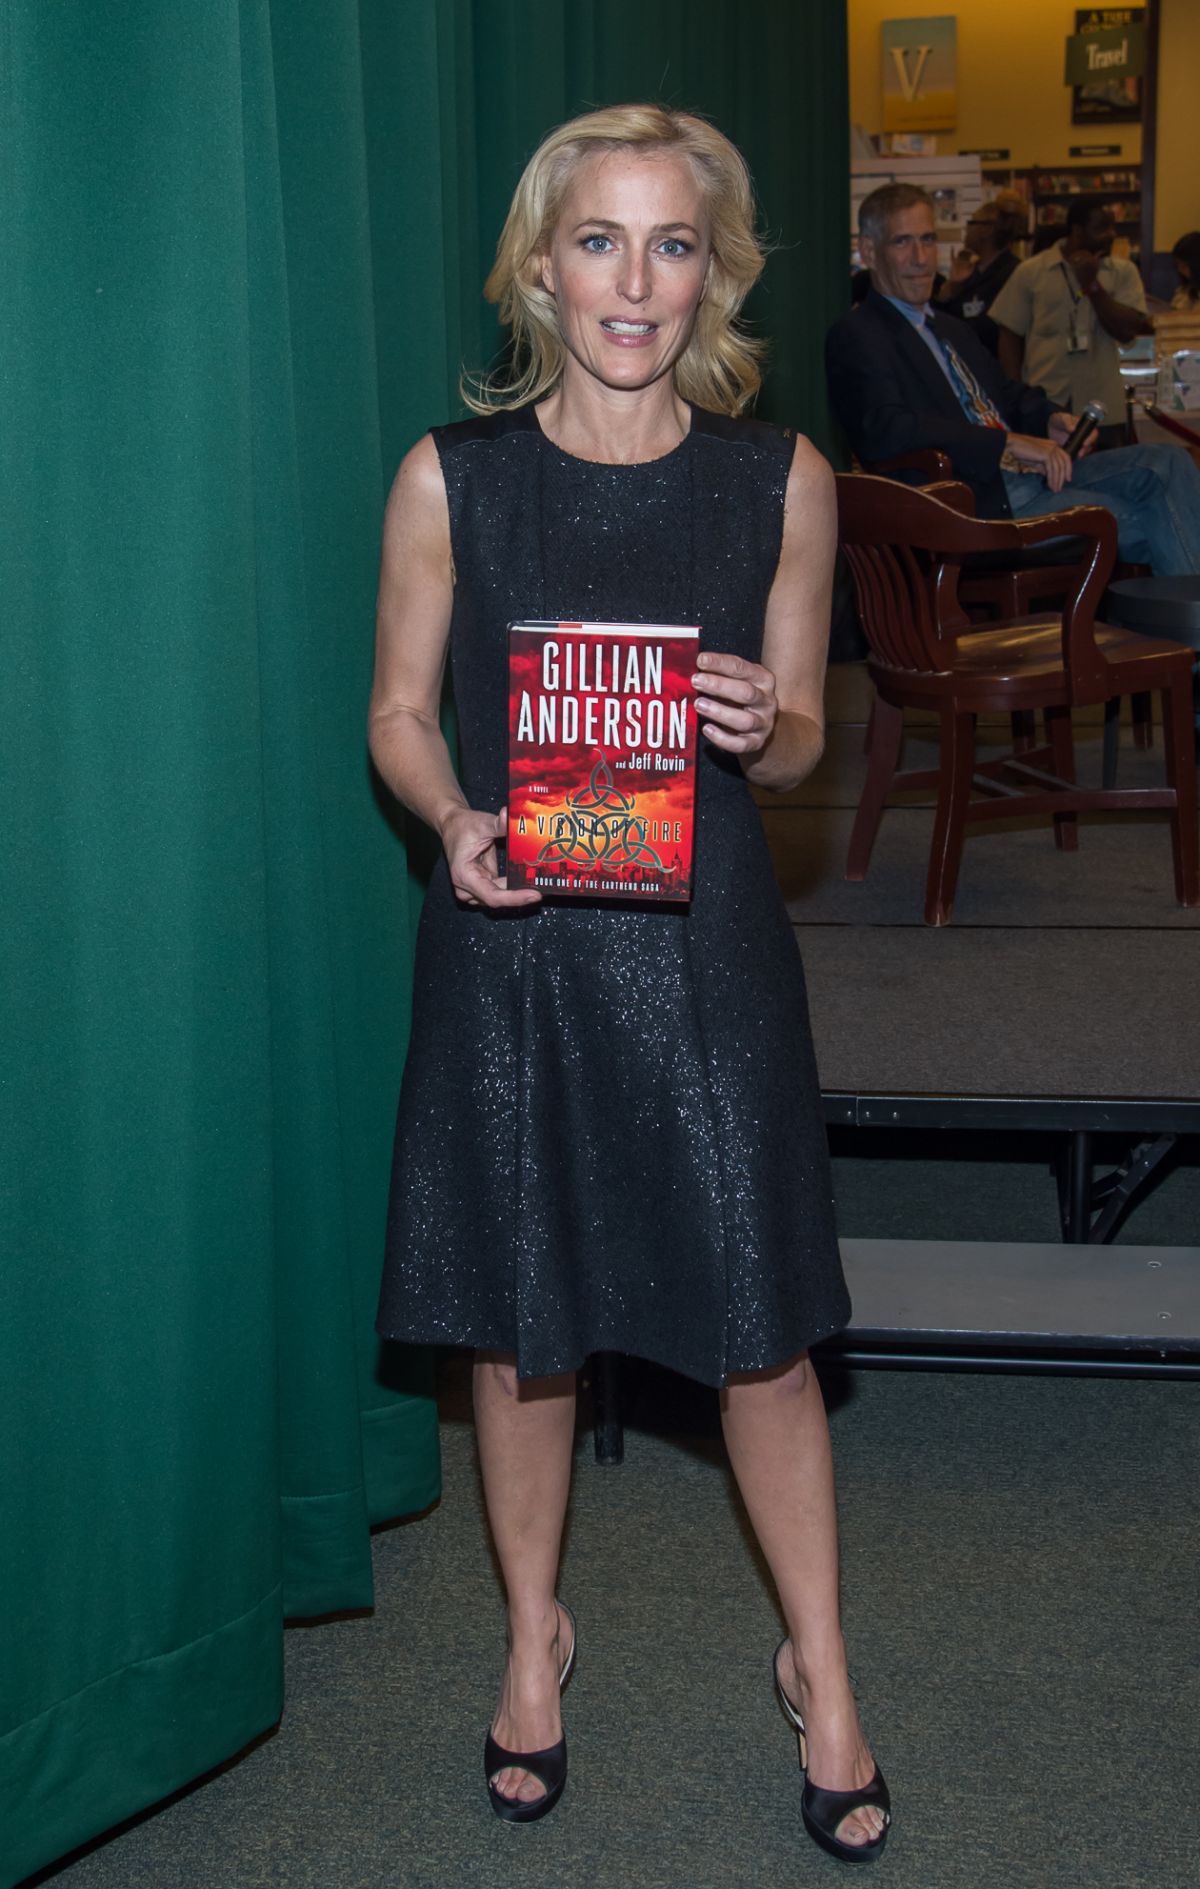 Gillian Anderson At In Conversation With Jeff Rovin Promotion In New York Hawtcelebs 3530